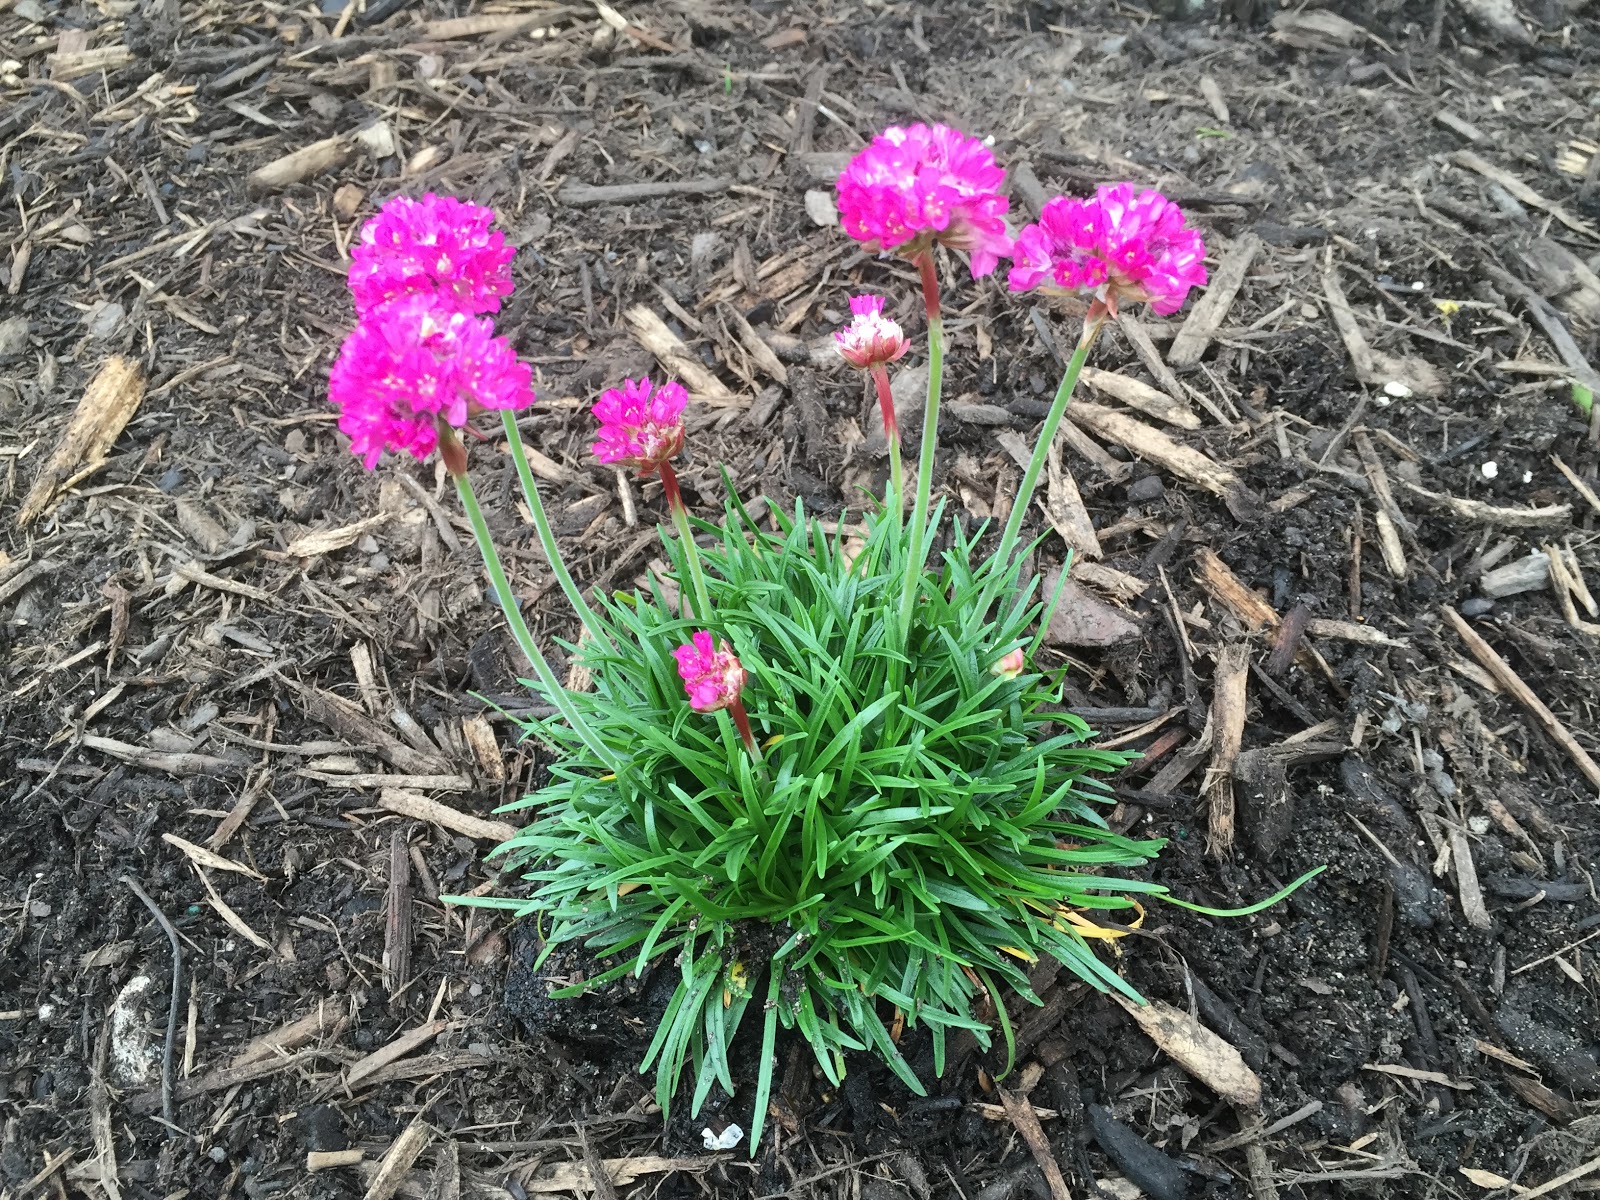 pink pompom flowers with grassy leaves